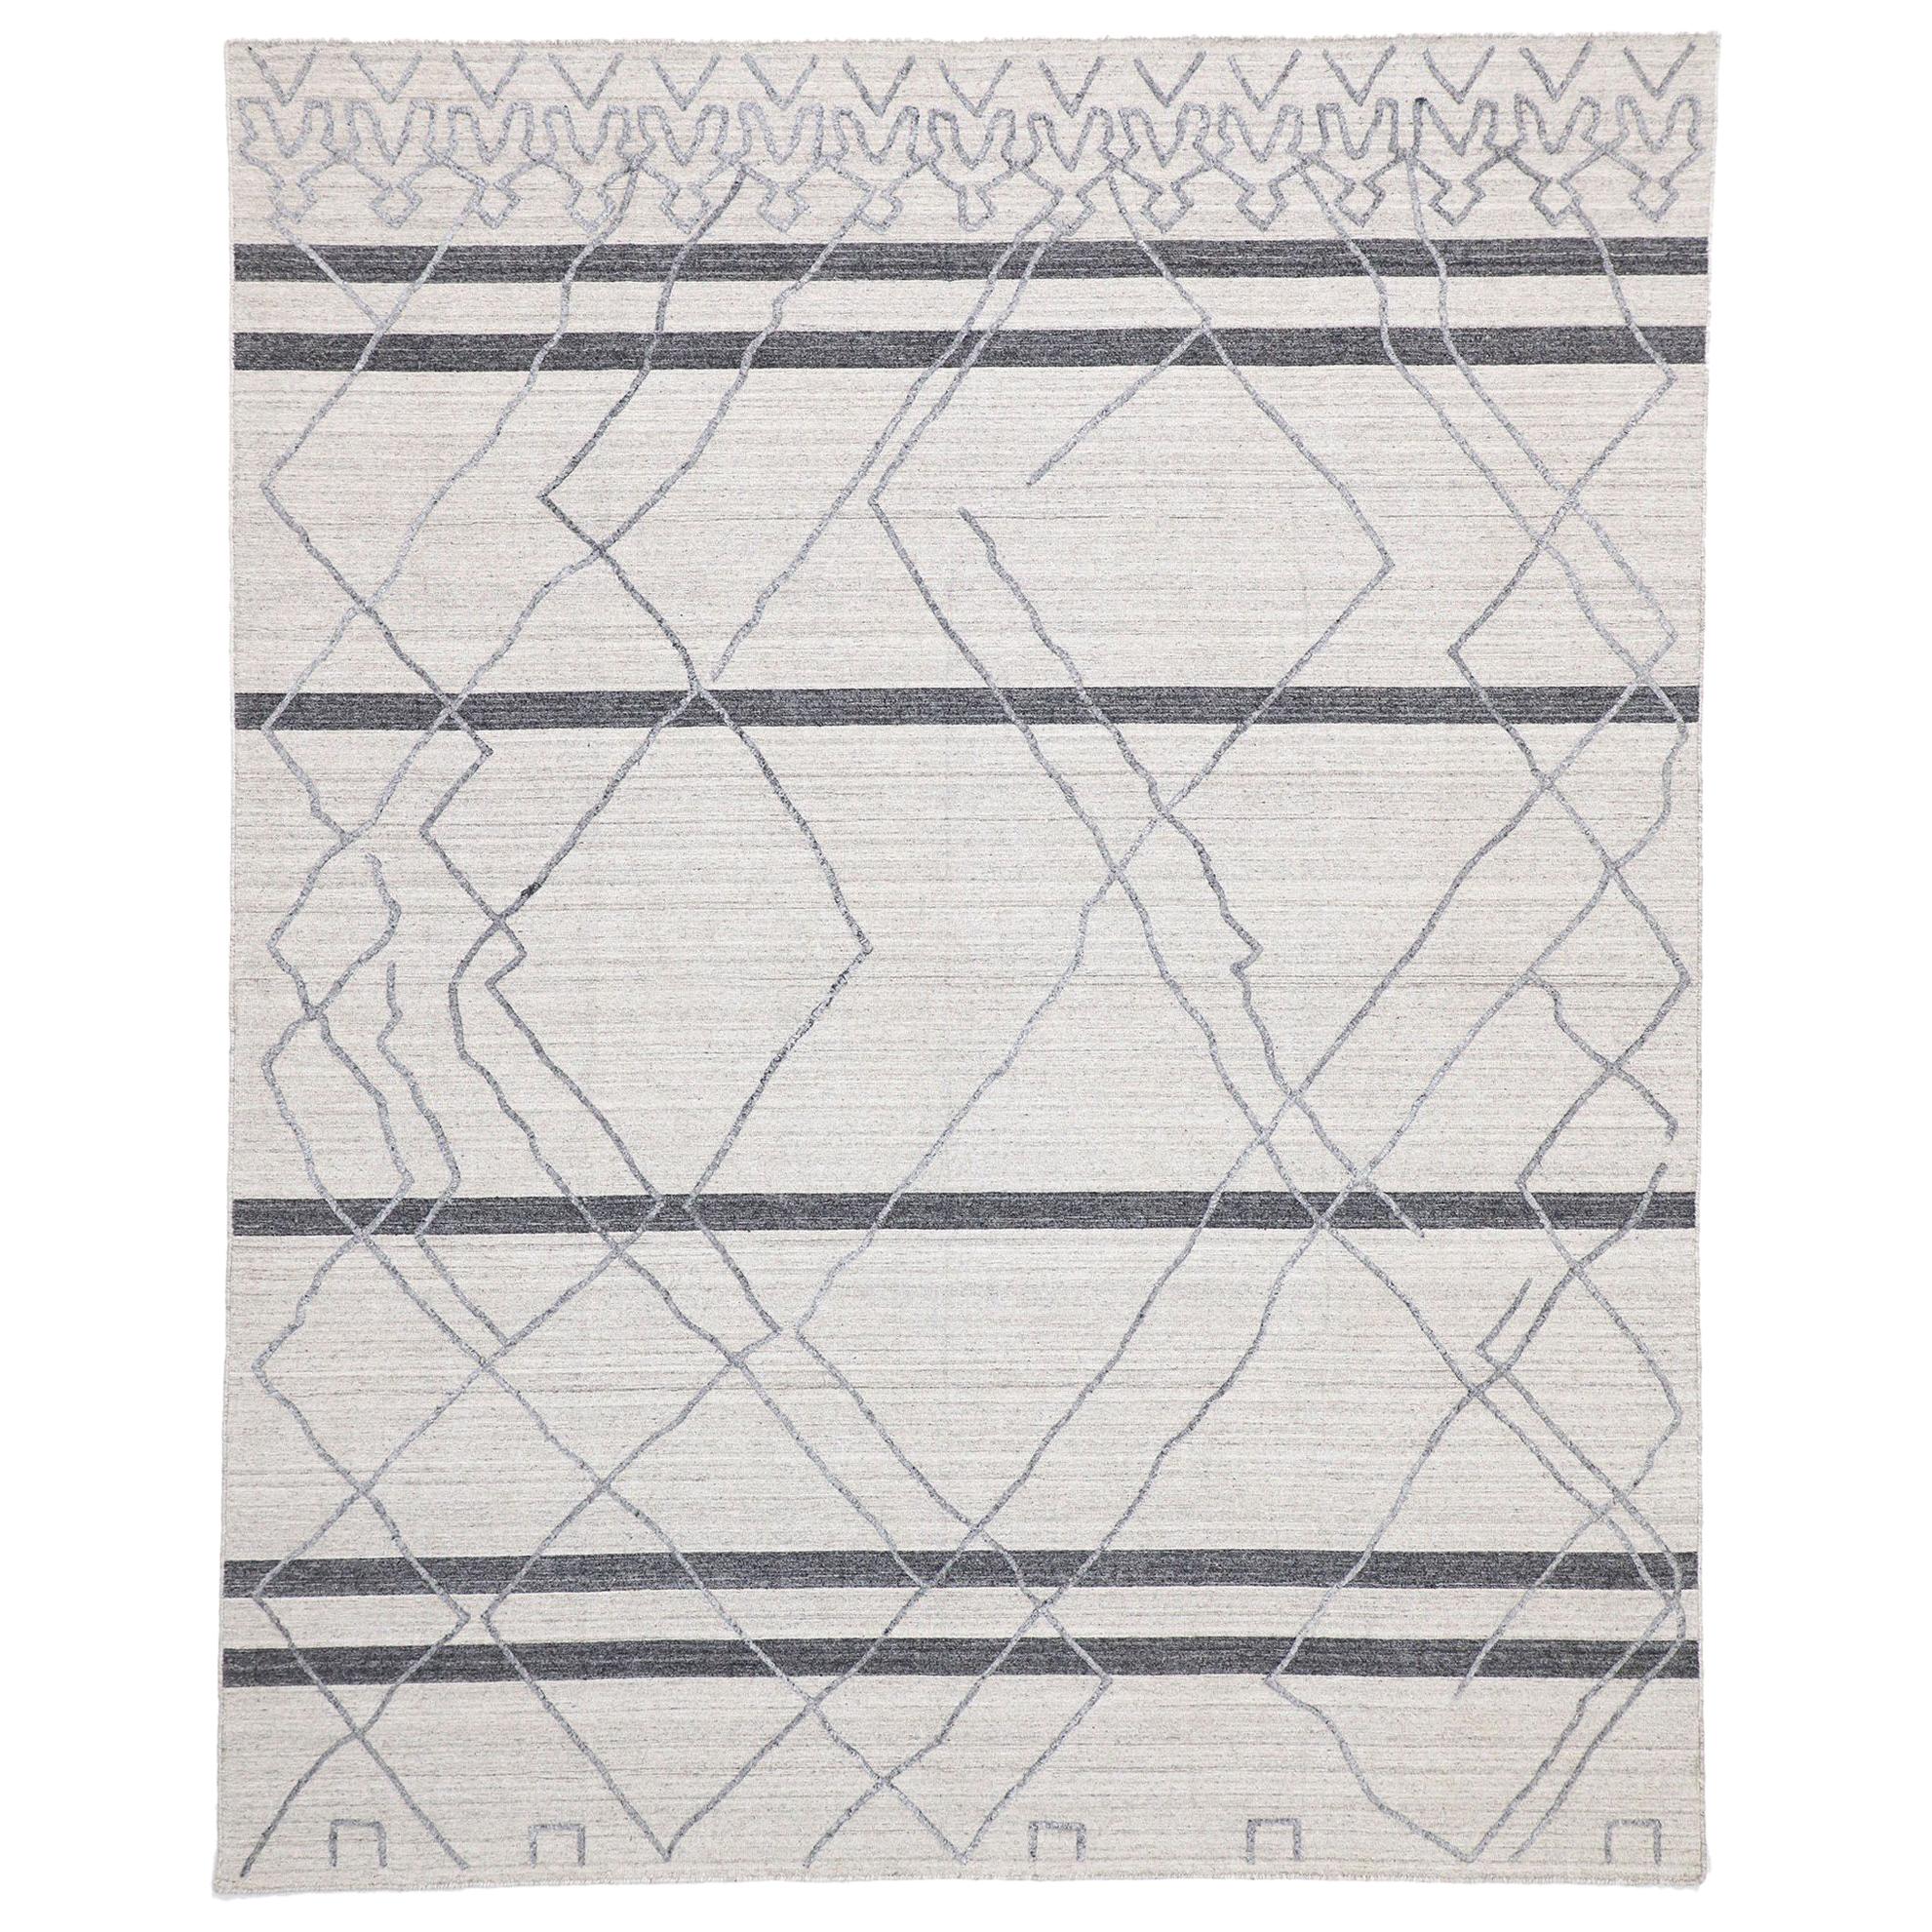 New Gray Modern Textured Rug with Raised Moroccan Trellis Design